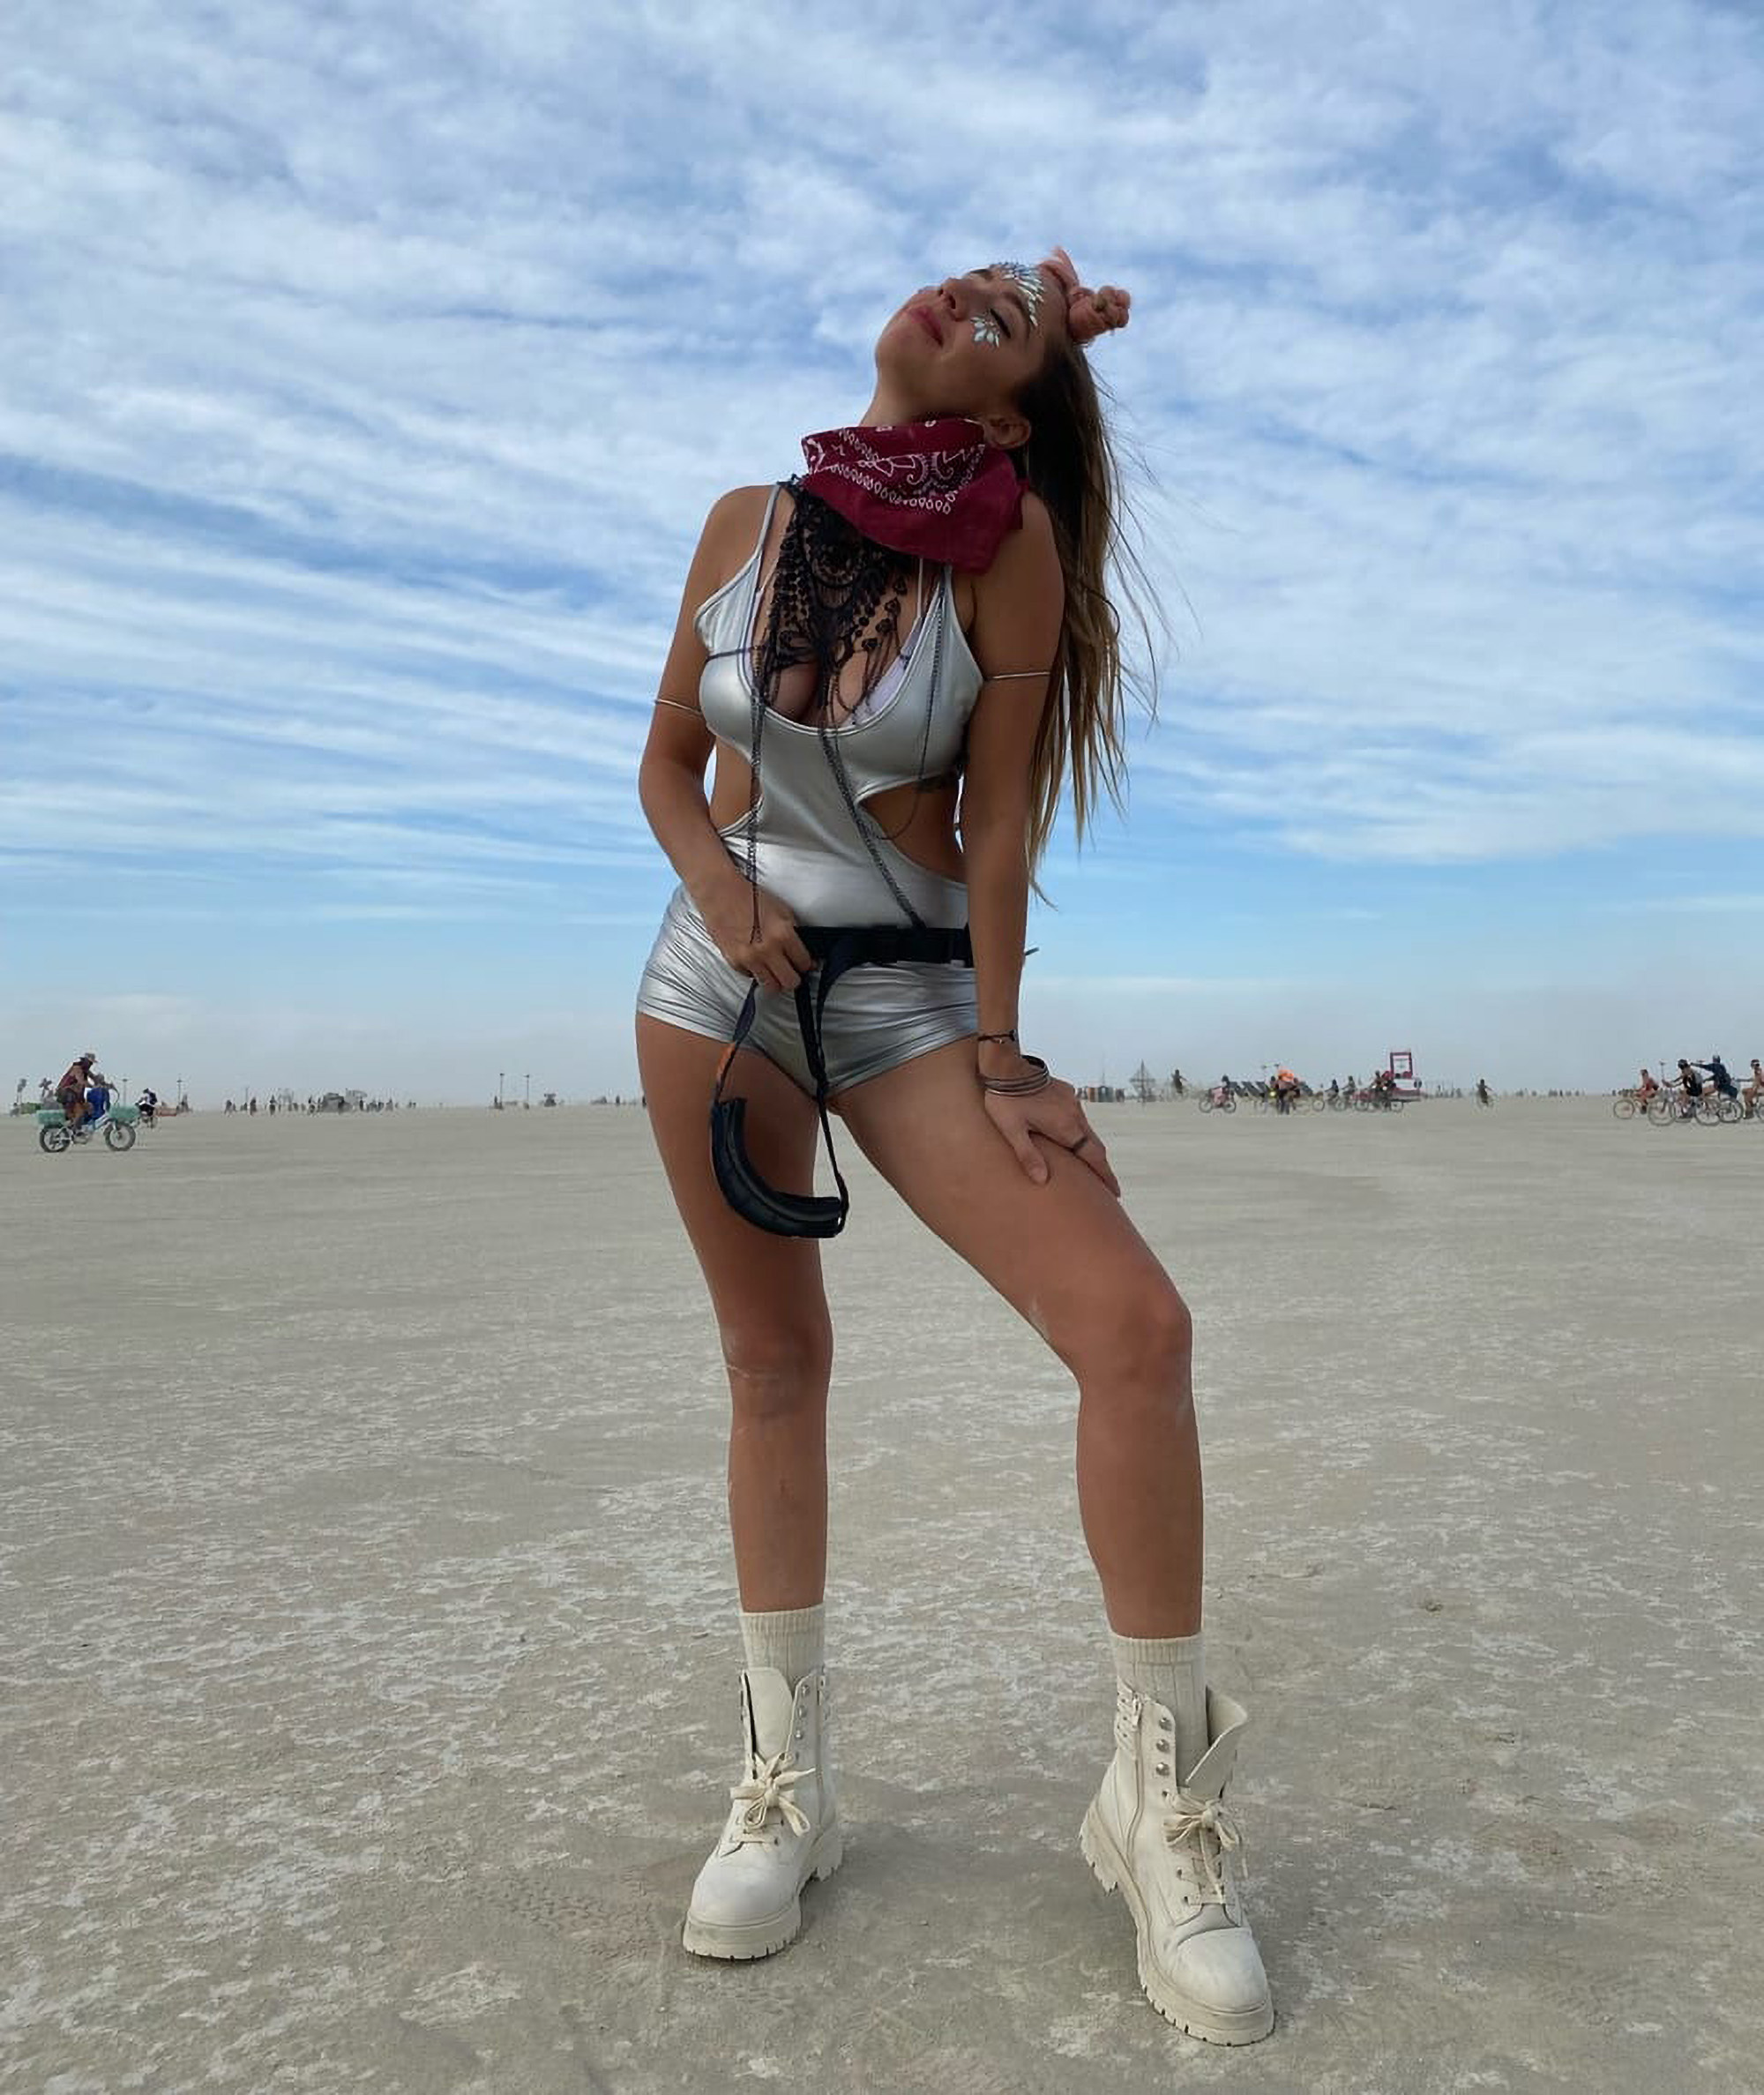 Read more about the article Celeb Photographer Flees Nevada Desert Festival After Being Stuck Along With 70,000 People Due To Heavy Rains